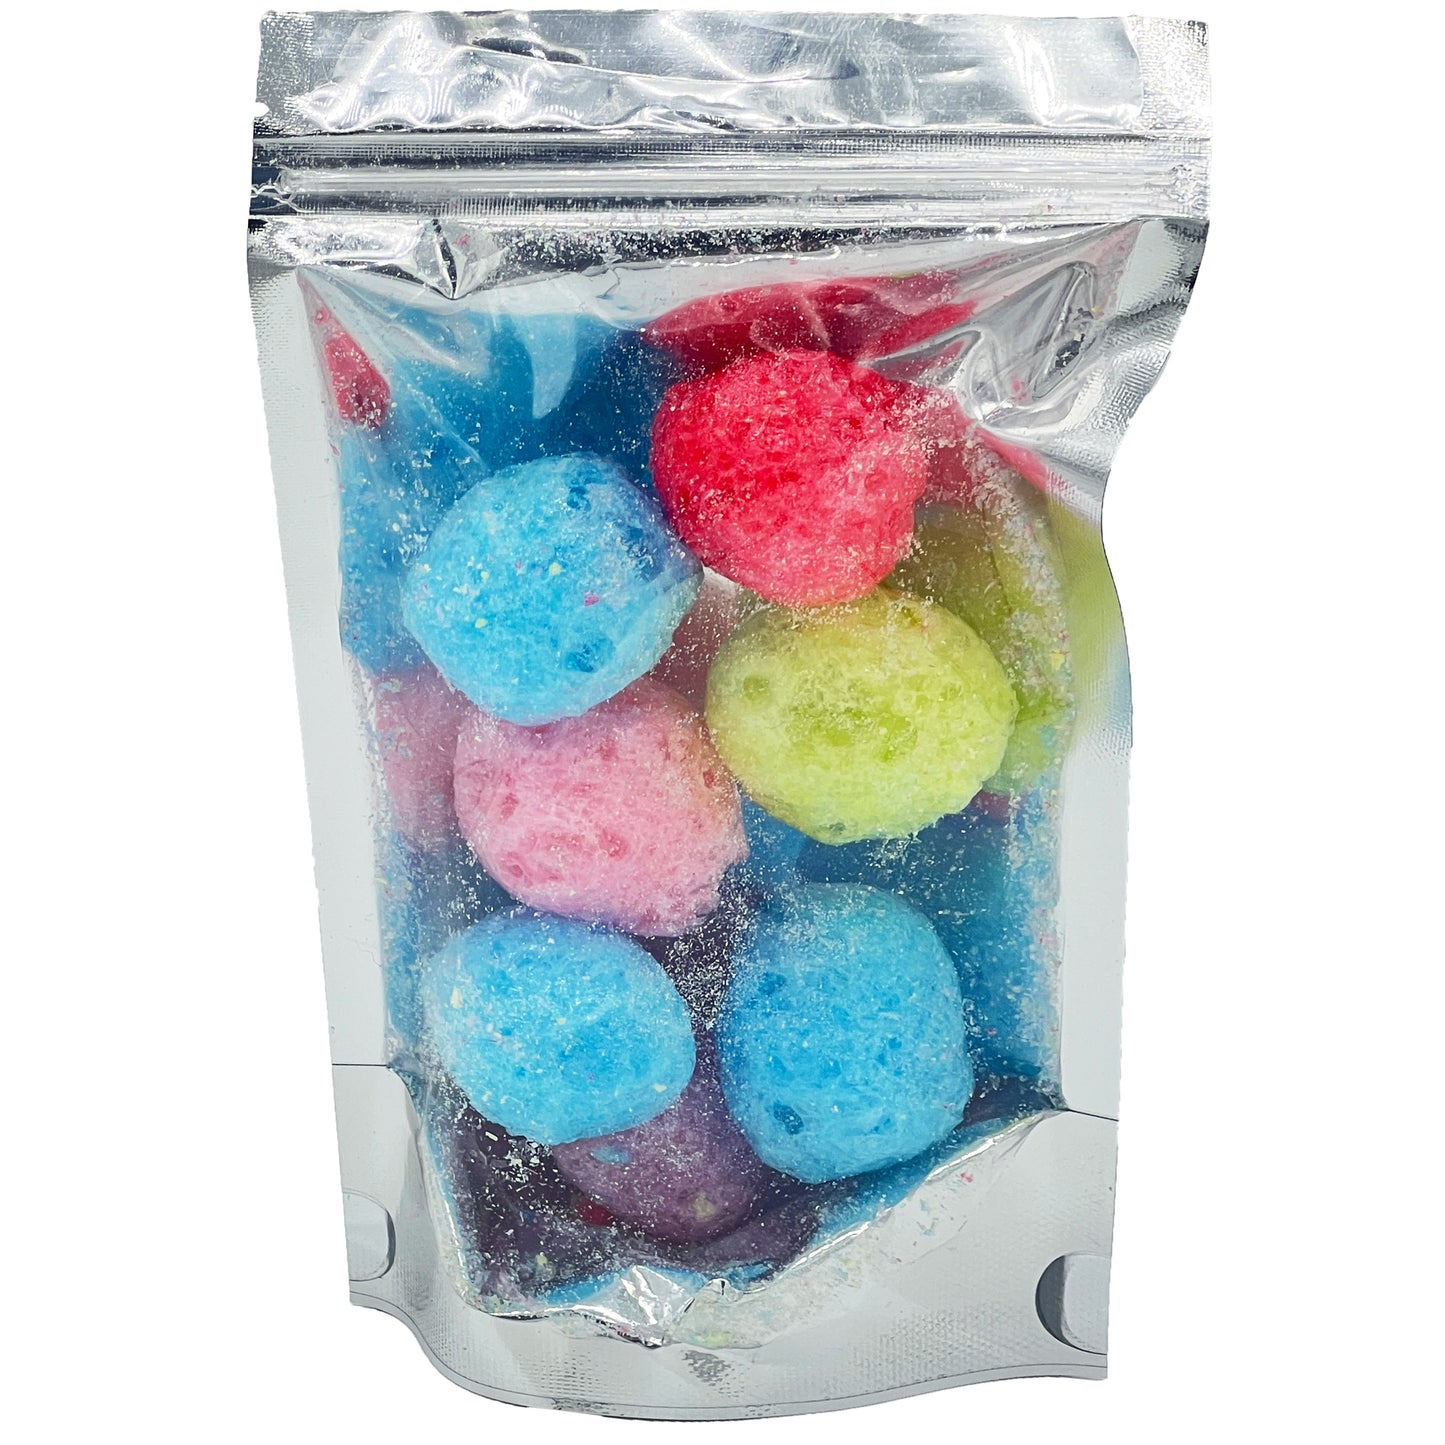 Freeze Dried Candy Sour Merry Balls Variety Pack Crispy Treats